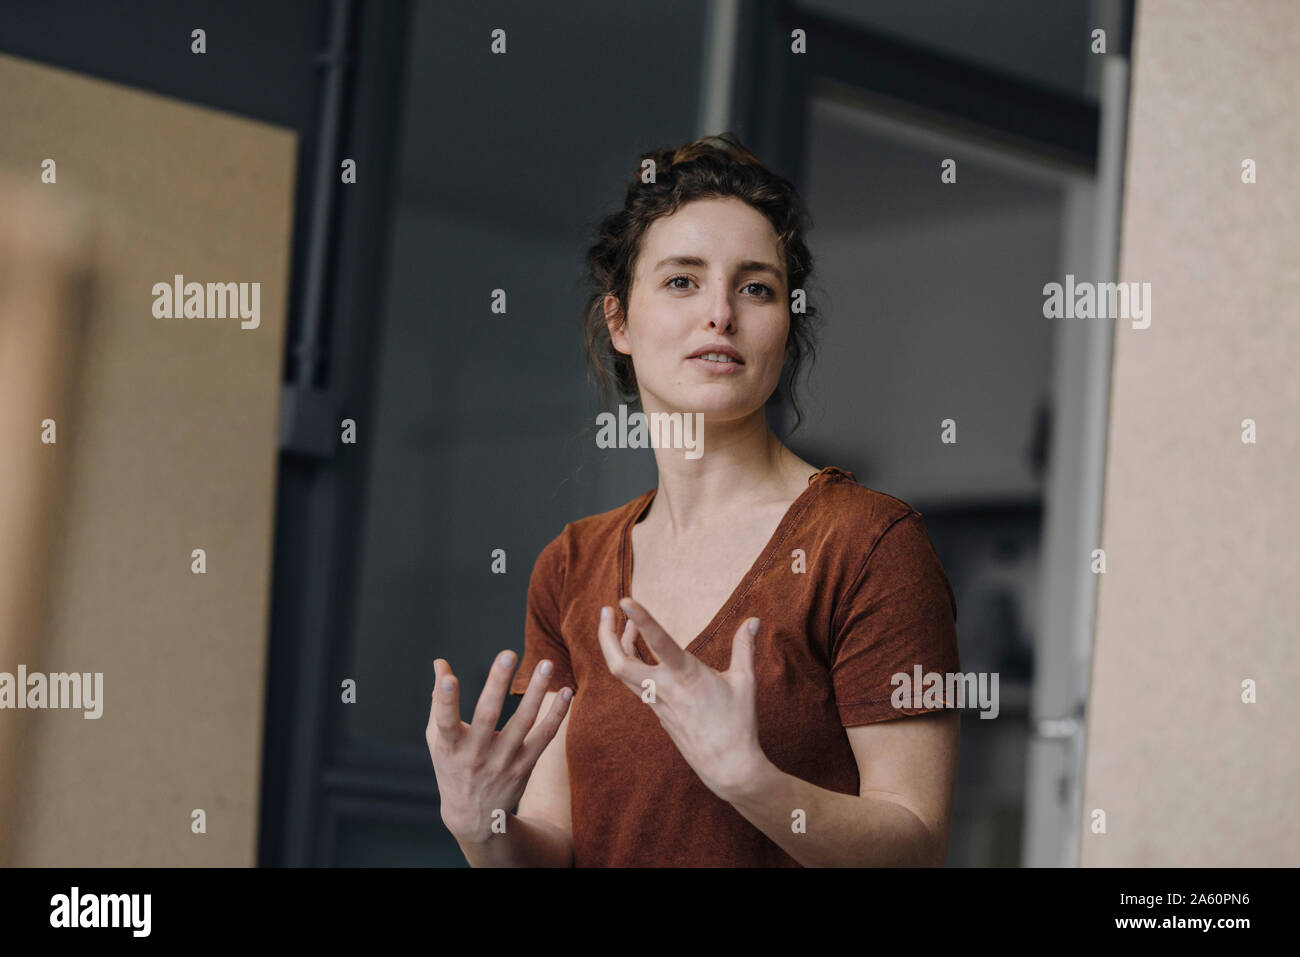 Portrait of gesturing young woman Stock Photo